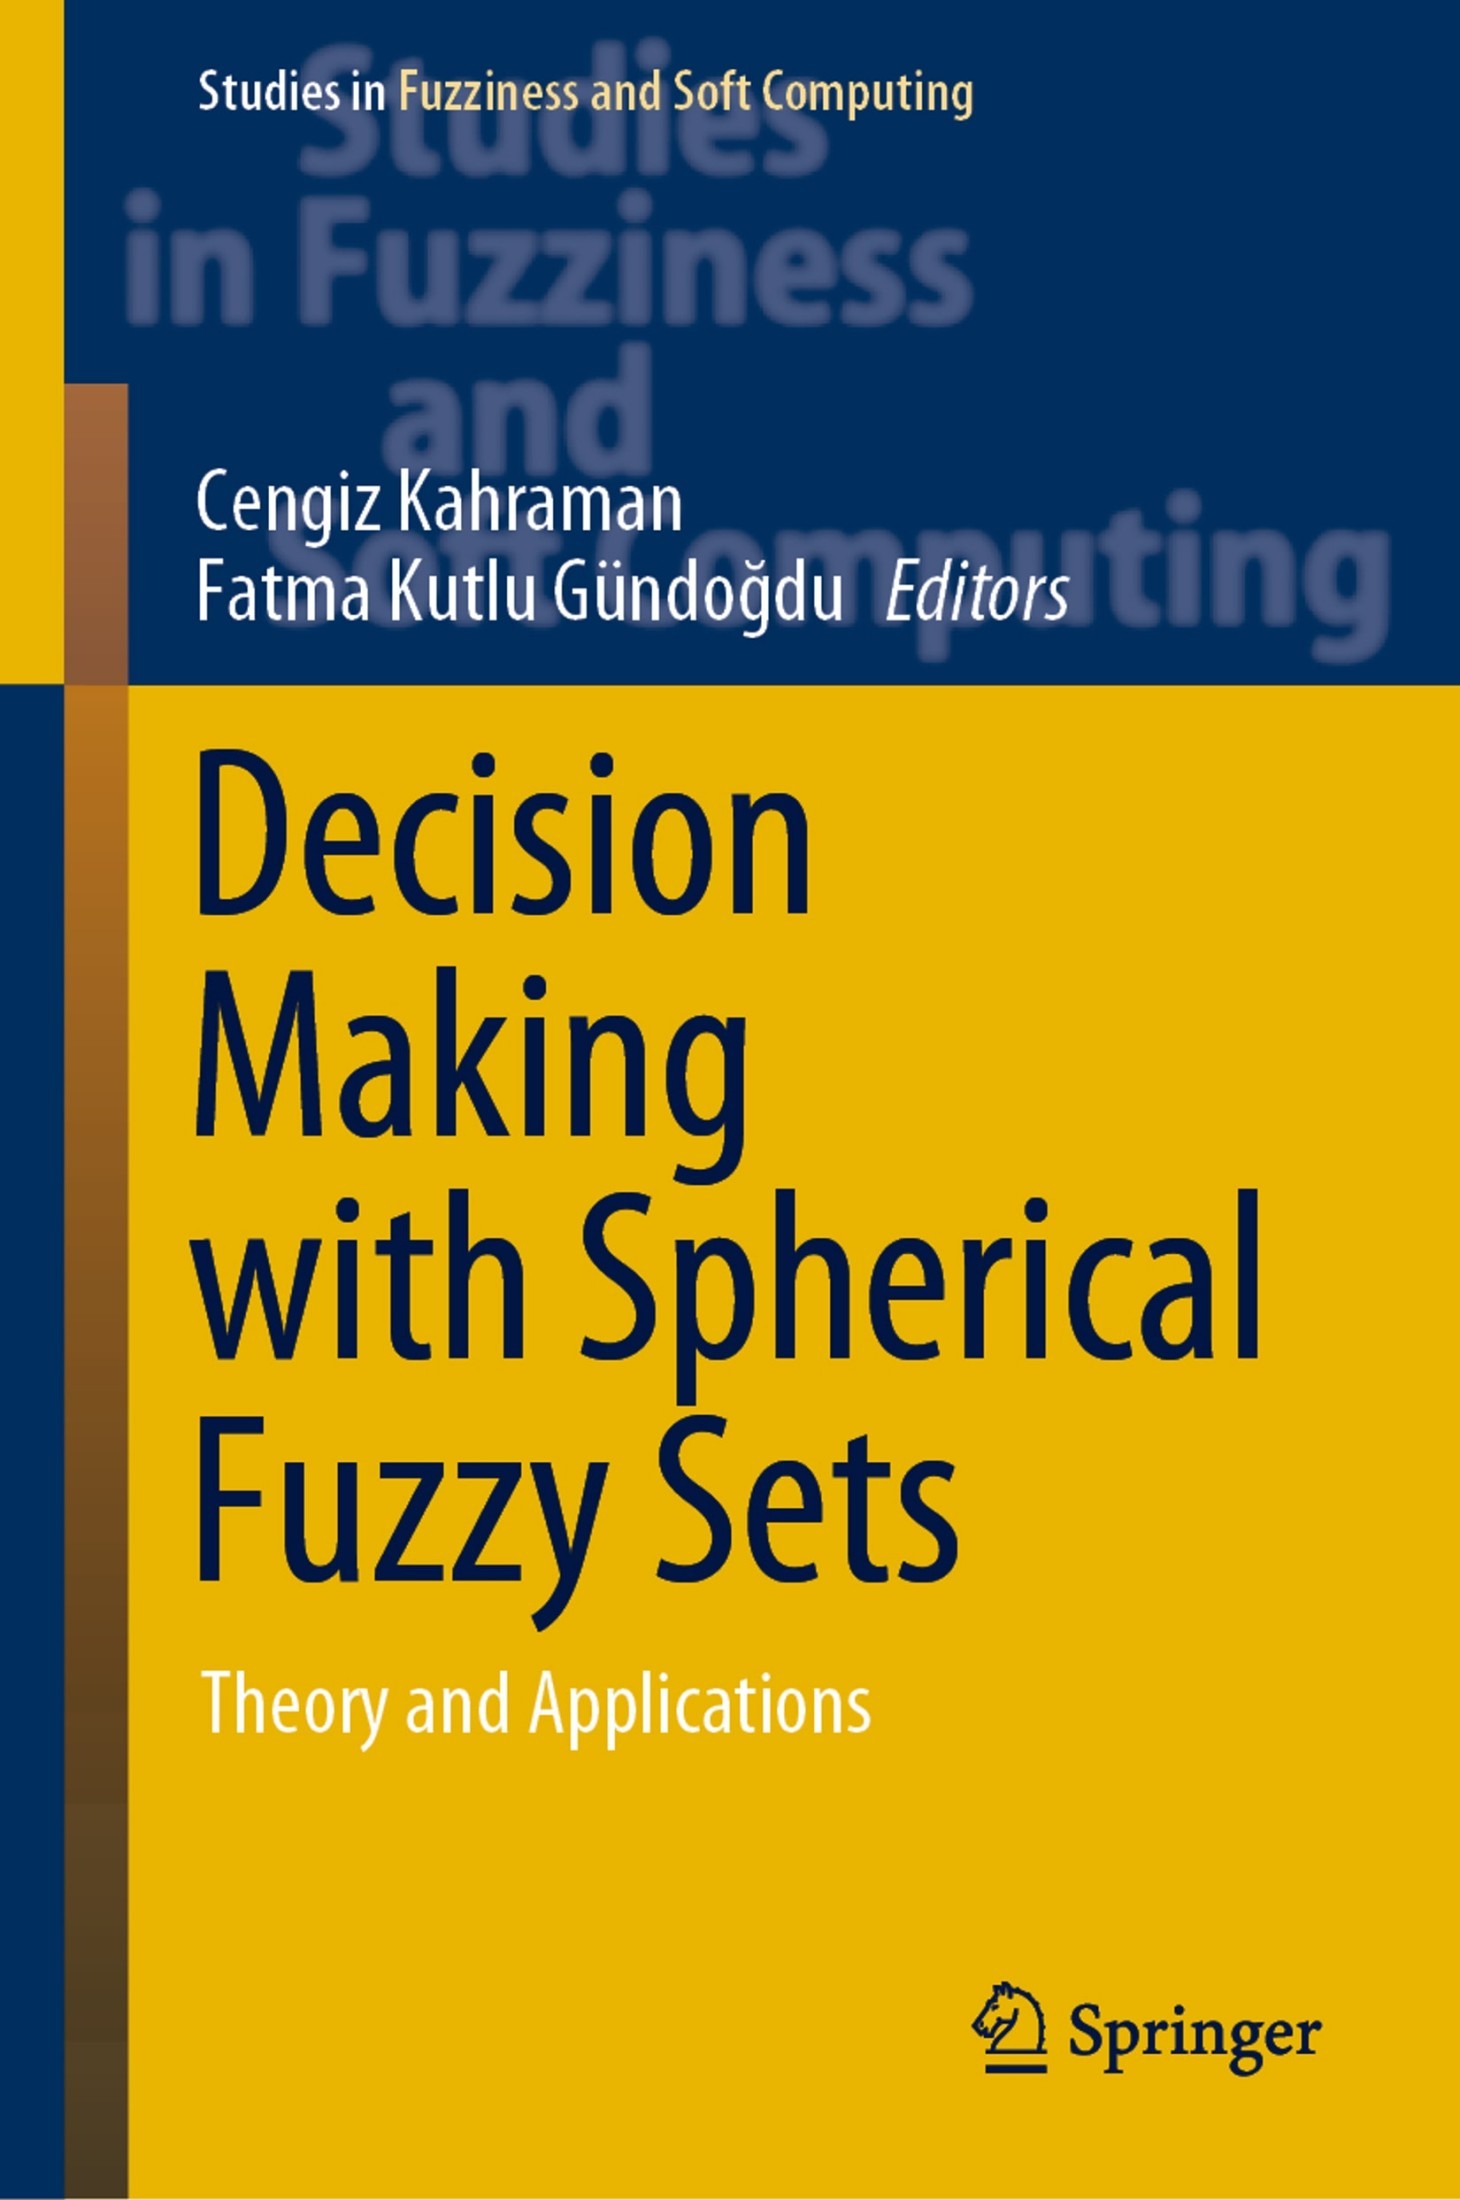 Decision Making with Spherical Fuzzy Sets